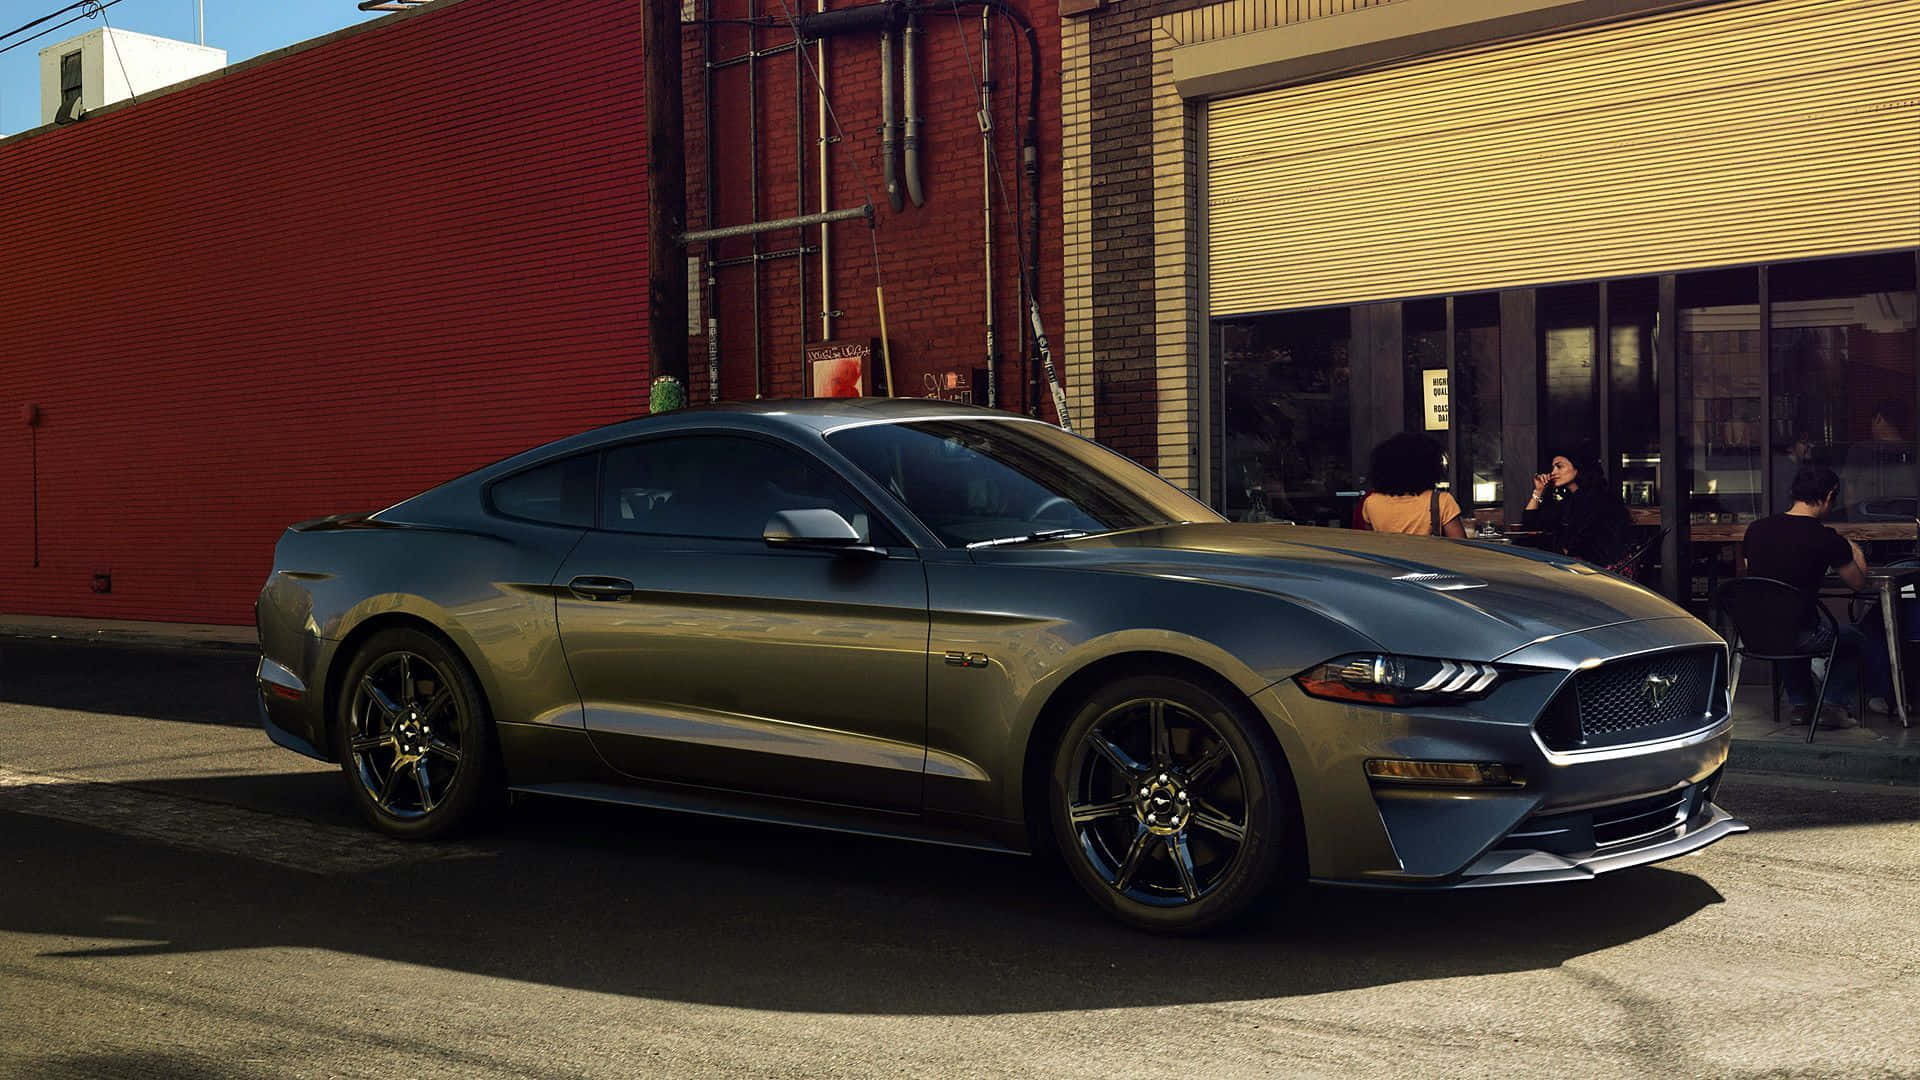 Ford Mustang 2018 Model In A Street Wallpaper